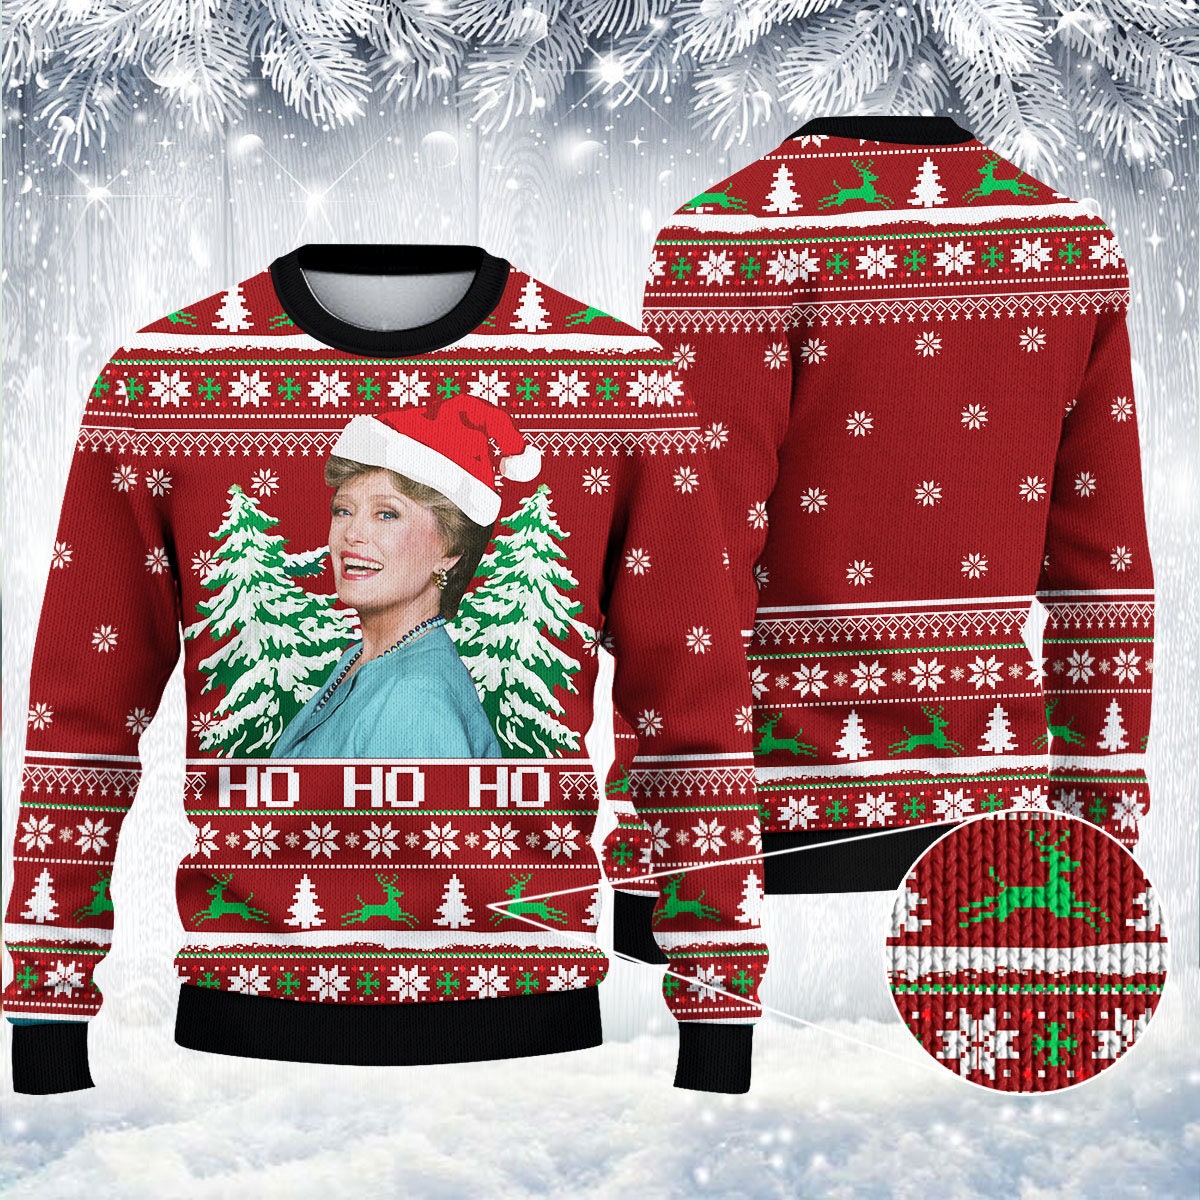 The Golden Girls Blanche Devereaux Christmas Ugly Sweater 1